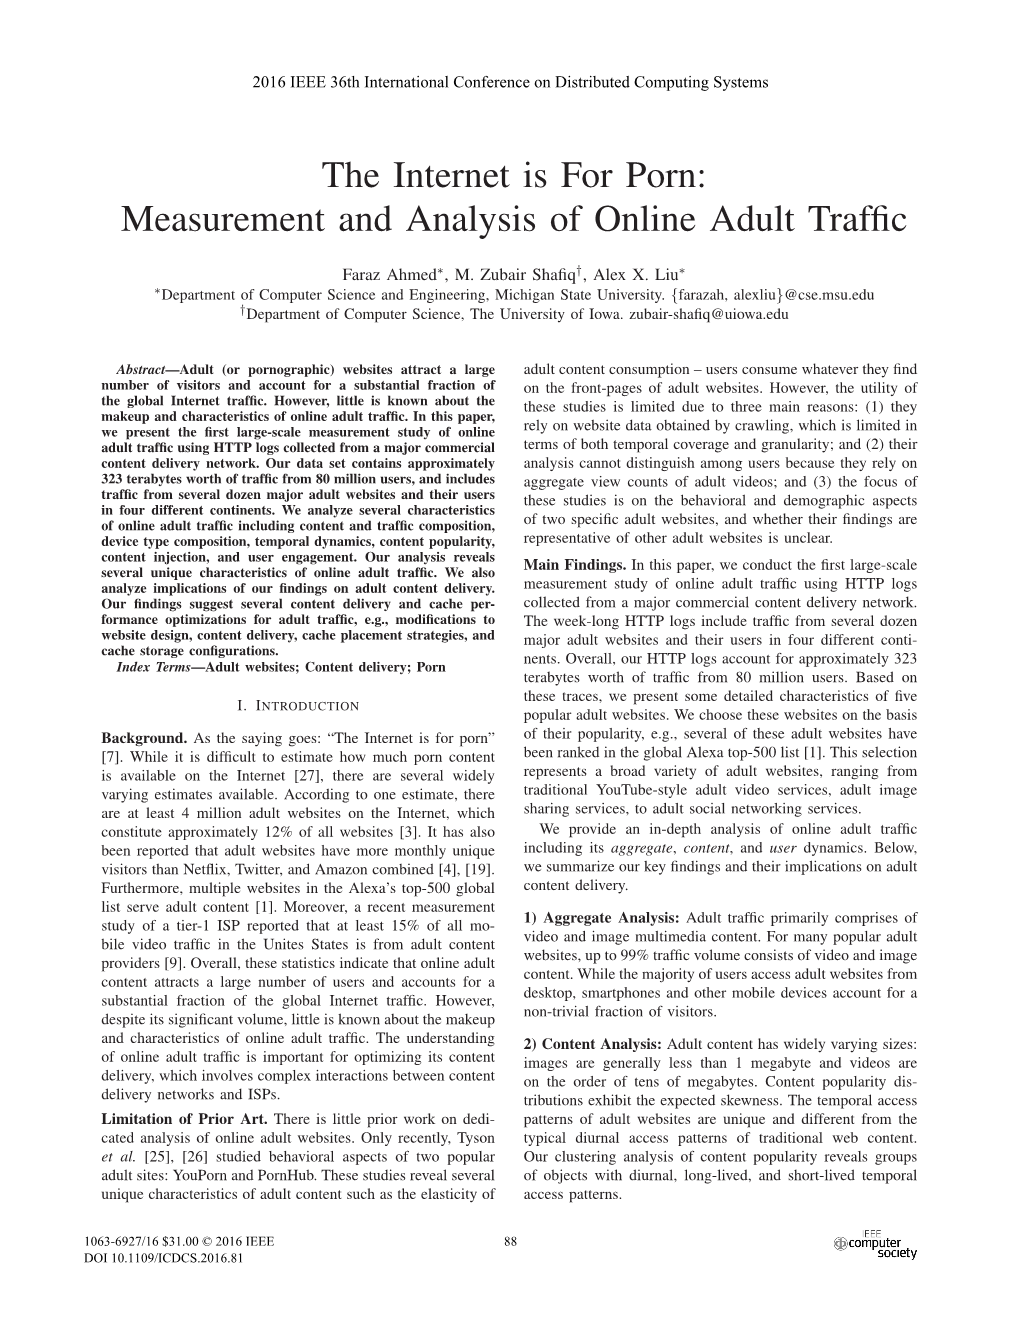 The Internet Is for Porn: Measurement and Analysis of Online Adult Traffic